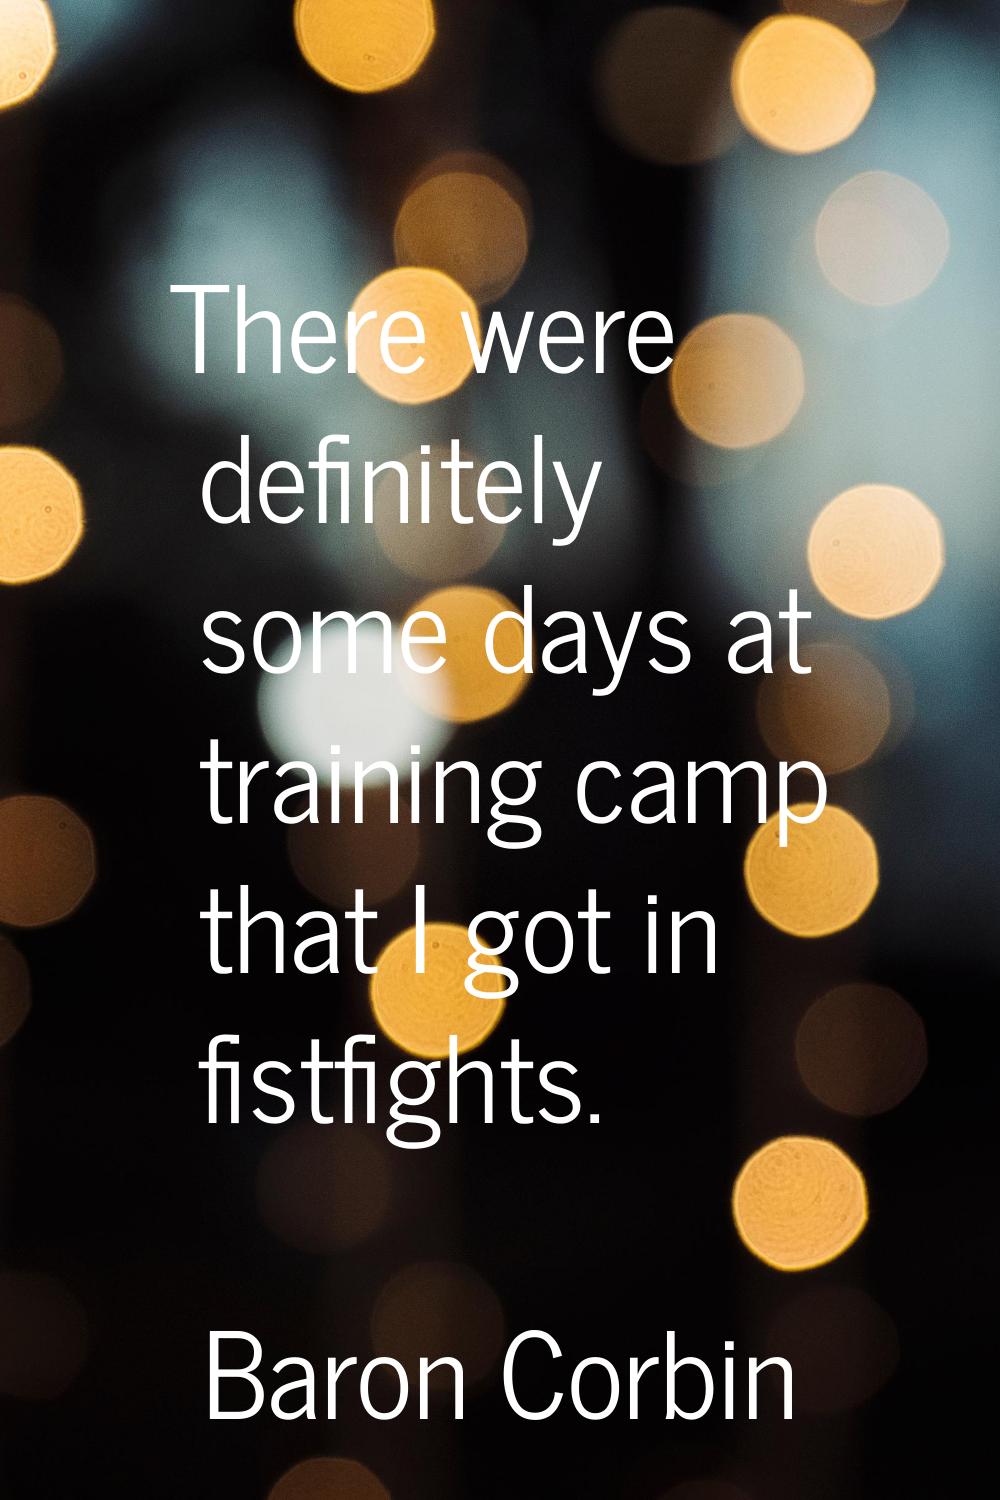 There were definitely some days at training camp that I got in fistfights.